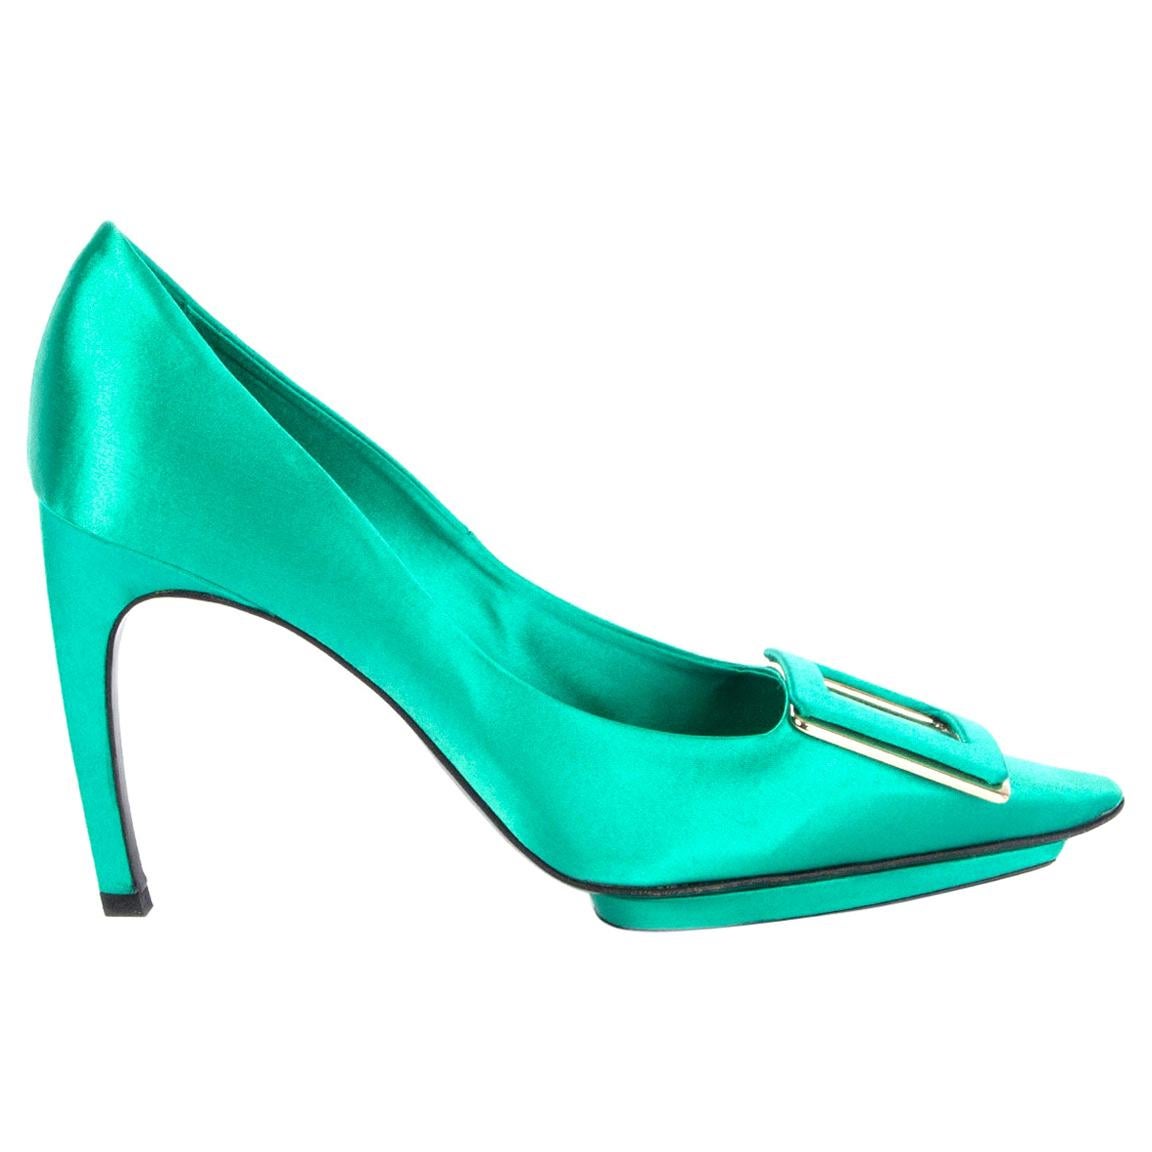 ROGER VIVIER mint green satin Pointed-Toe Buckle Pumps Shoes 38